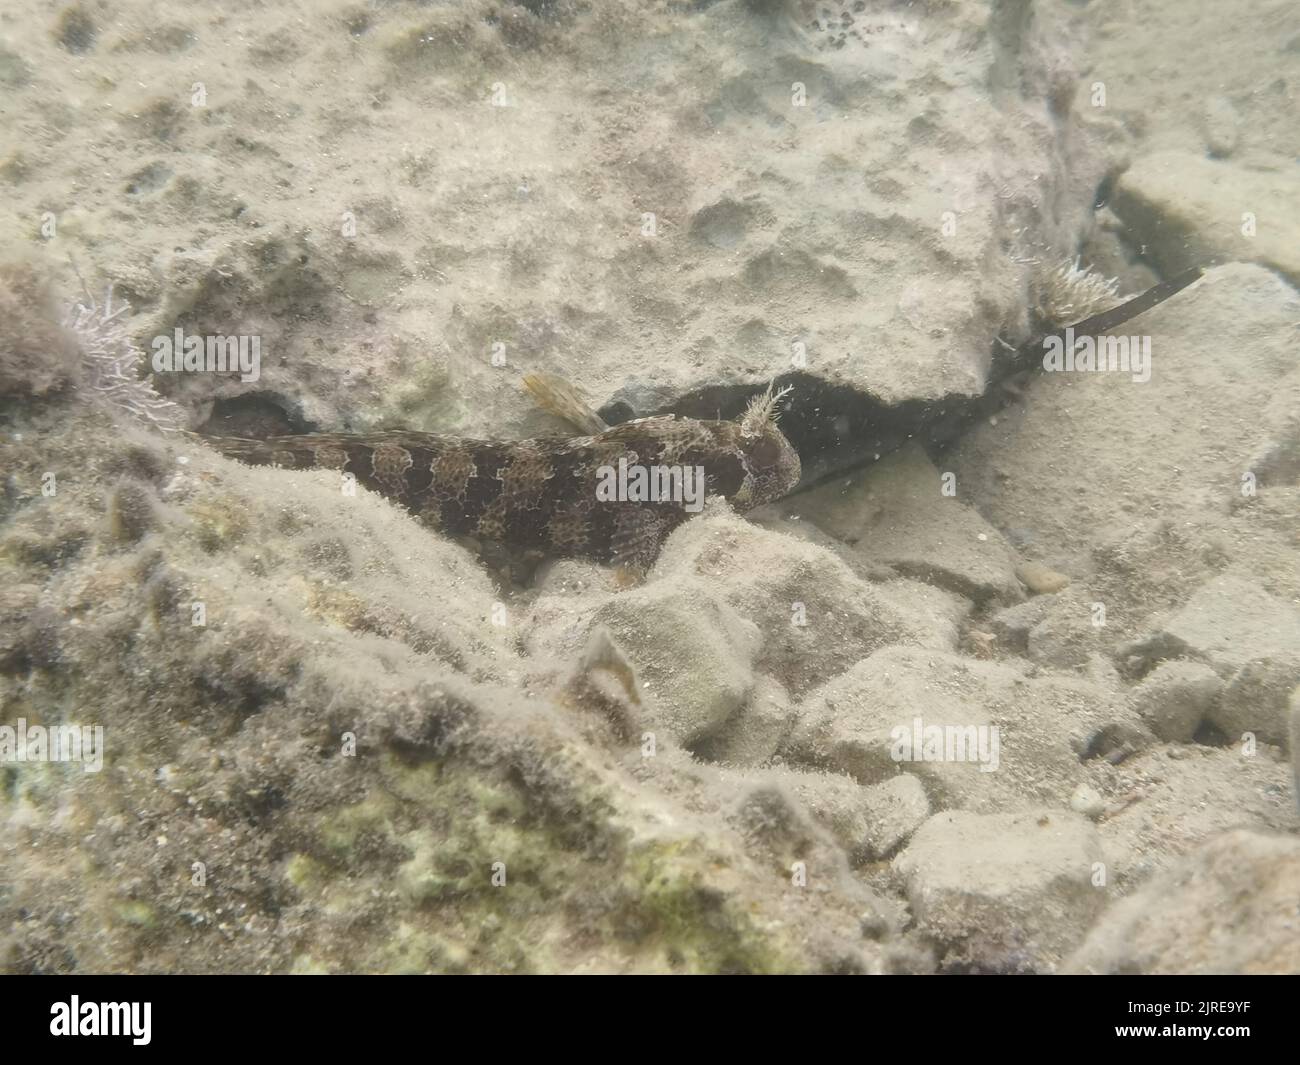 NAFPLIO GREECE - BLENNIUS OCELLARIS. FISH Nafplio, Greece , Wednesday, August 24, 2022.  A  Blennius ocellaris type fish in a location on the beach of Nafplion, It is a fish that prefers shallow zones (1 meter), stuck by gravel and steep rocks. It feeds almost exclusively on algae. It reproduces from May to July, with submerged and adhesive eggs. It reaches 20 cm in length. Fish common throughout the Mediterranean. They also call it glenia, glinus, leveres, saliakoudes, about 20 different species and subgenera are known. Credit: Vangelis Bougiotis/alamy live news Stock Photo